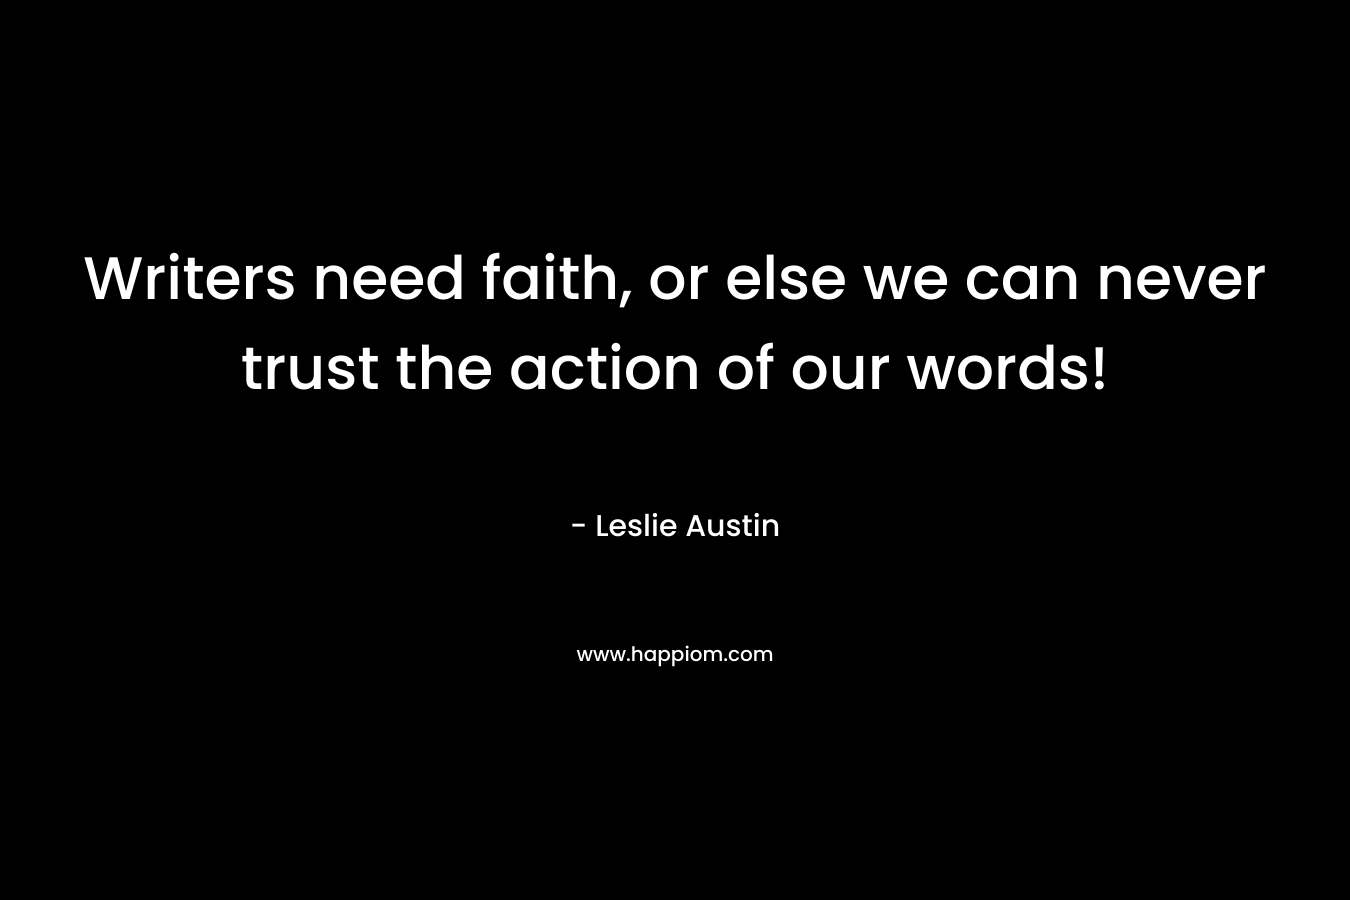 Writers need faith, or else we can never trust the action of our words!